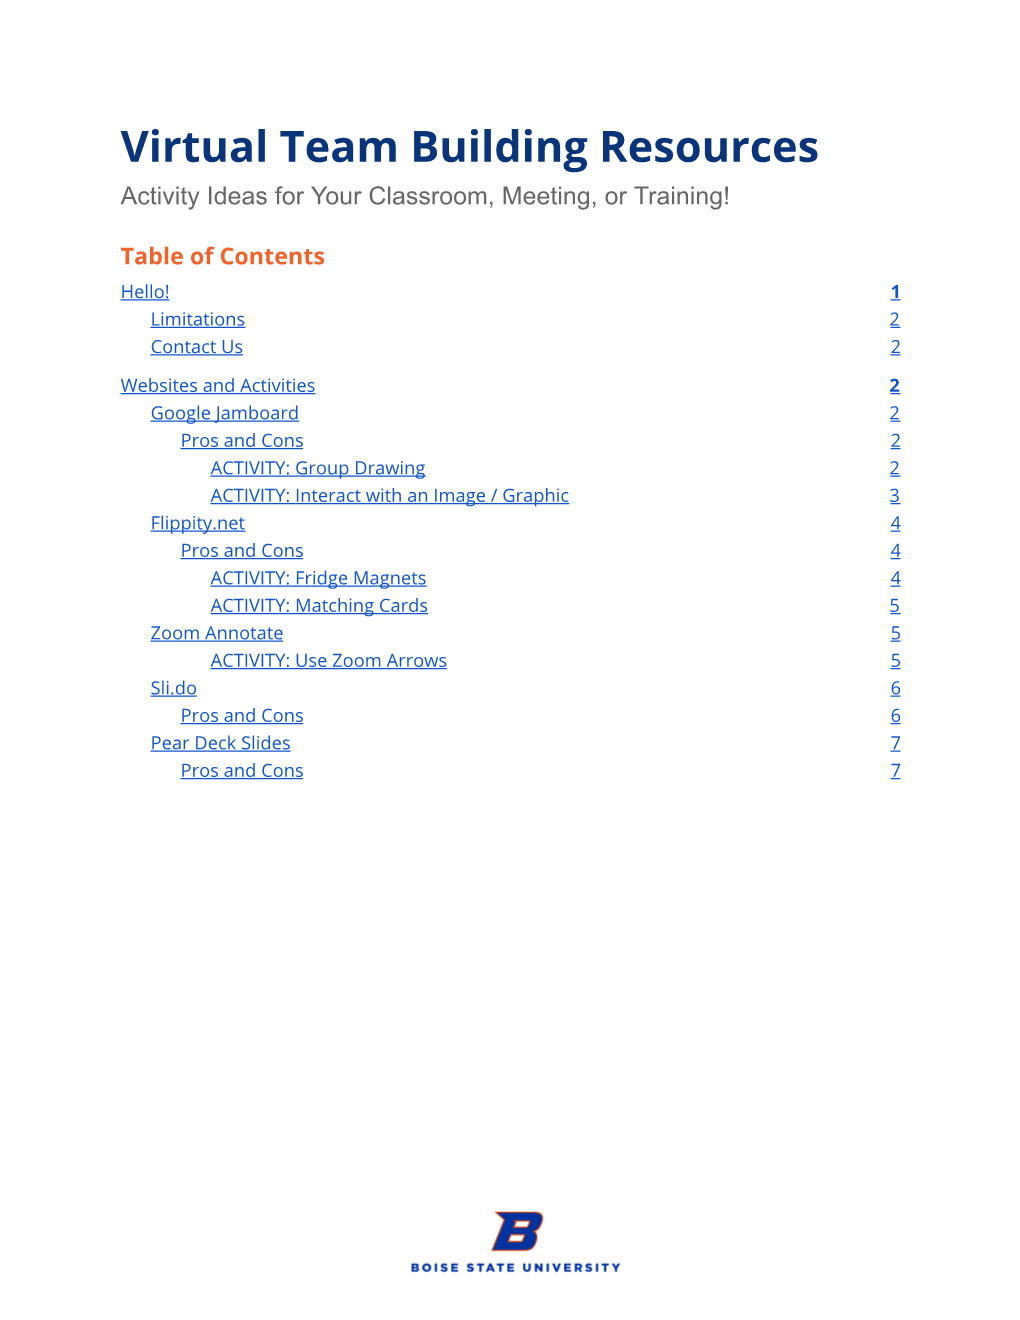 Virtual Team Building Resources Activity Ideas for Your Classroom, Meeting, Or Training!